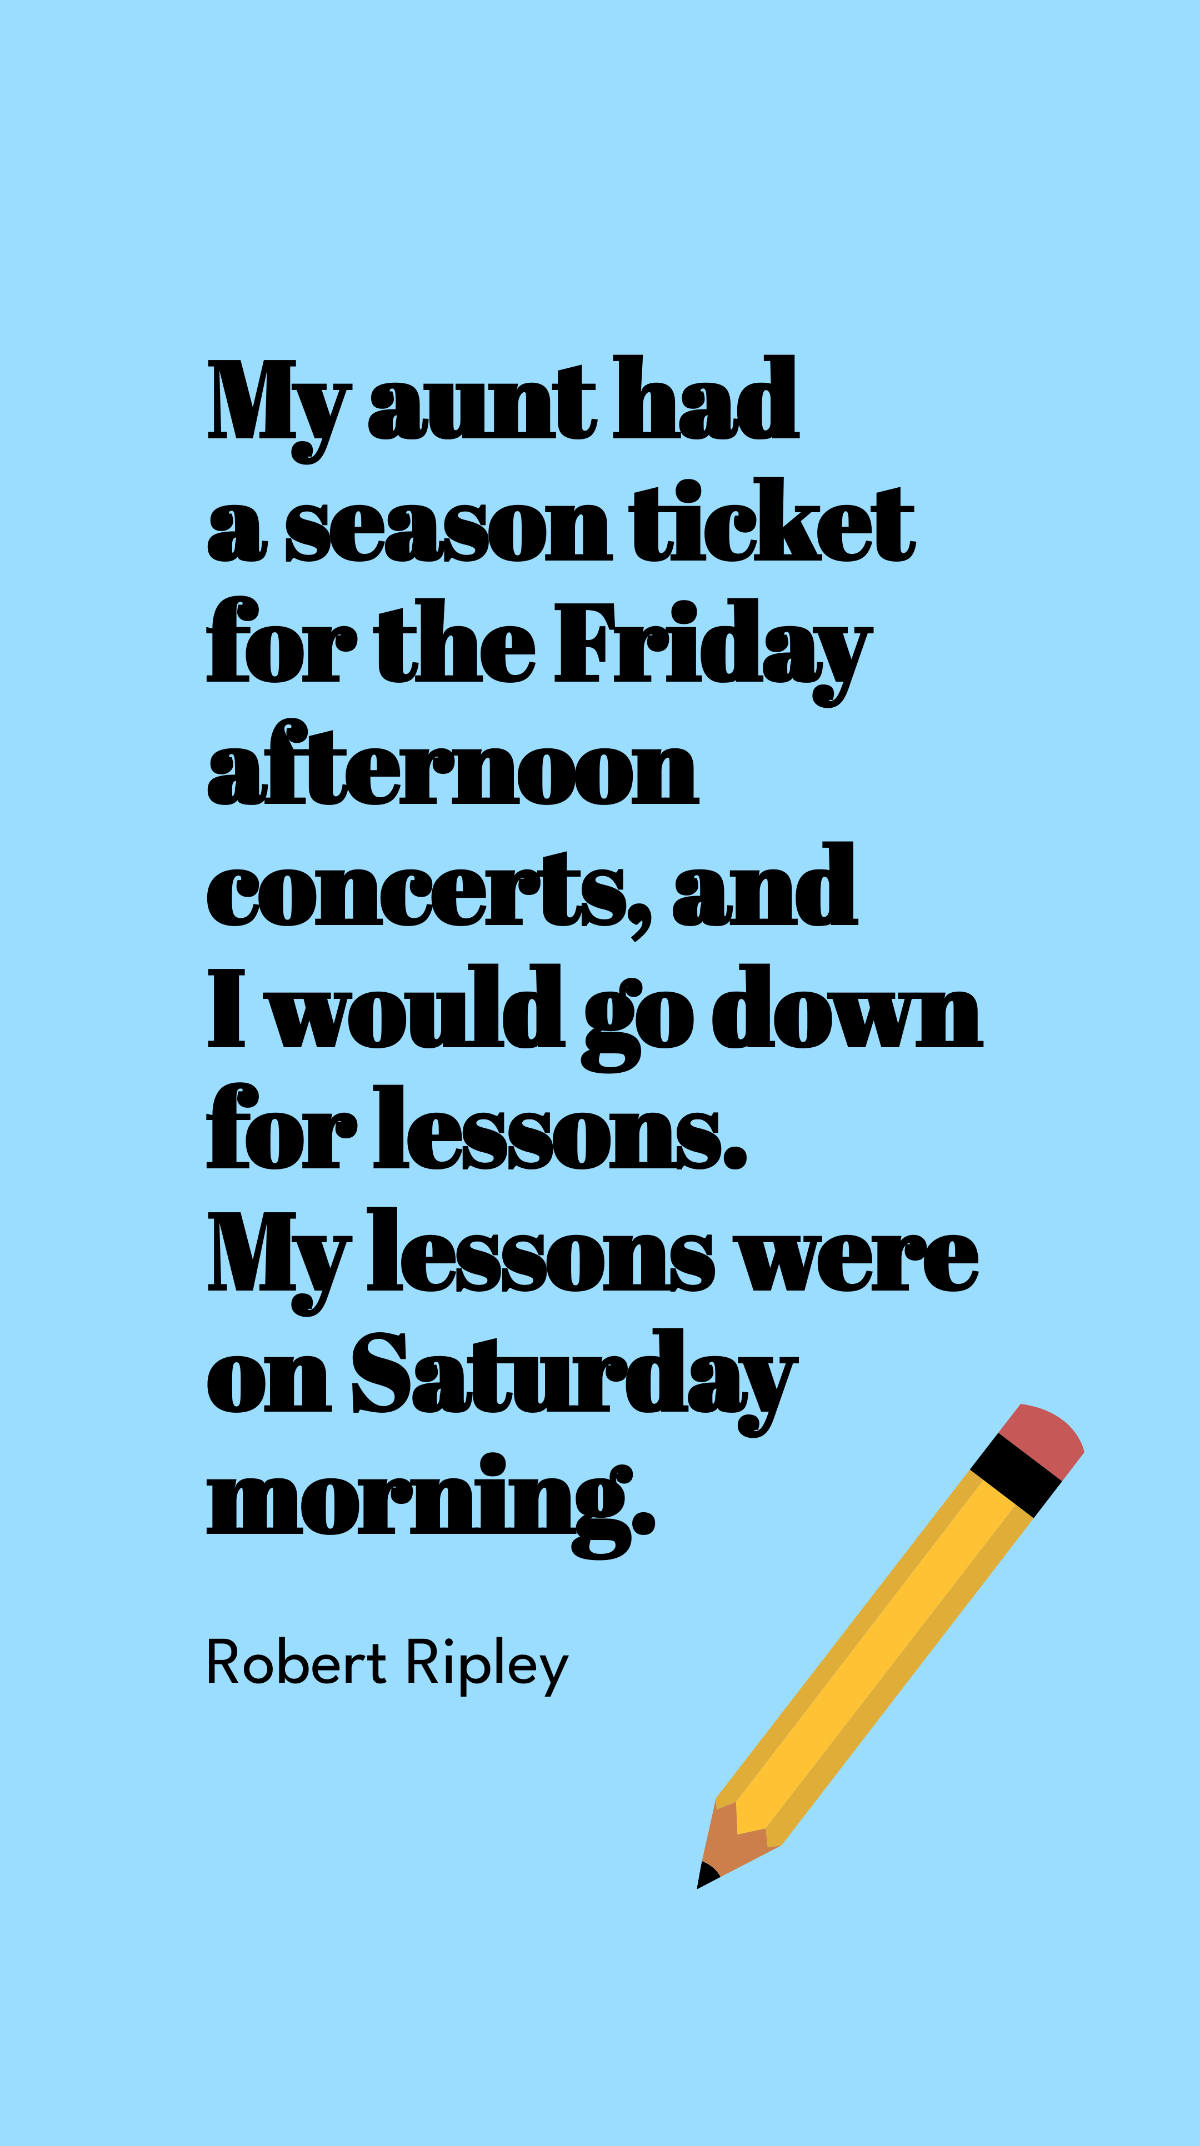 Free Robert Ripley - My aunt had a season ticket for the Friday afternoon concerts, and I would go down for lessons. My lessons were on Saturday morning. Template